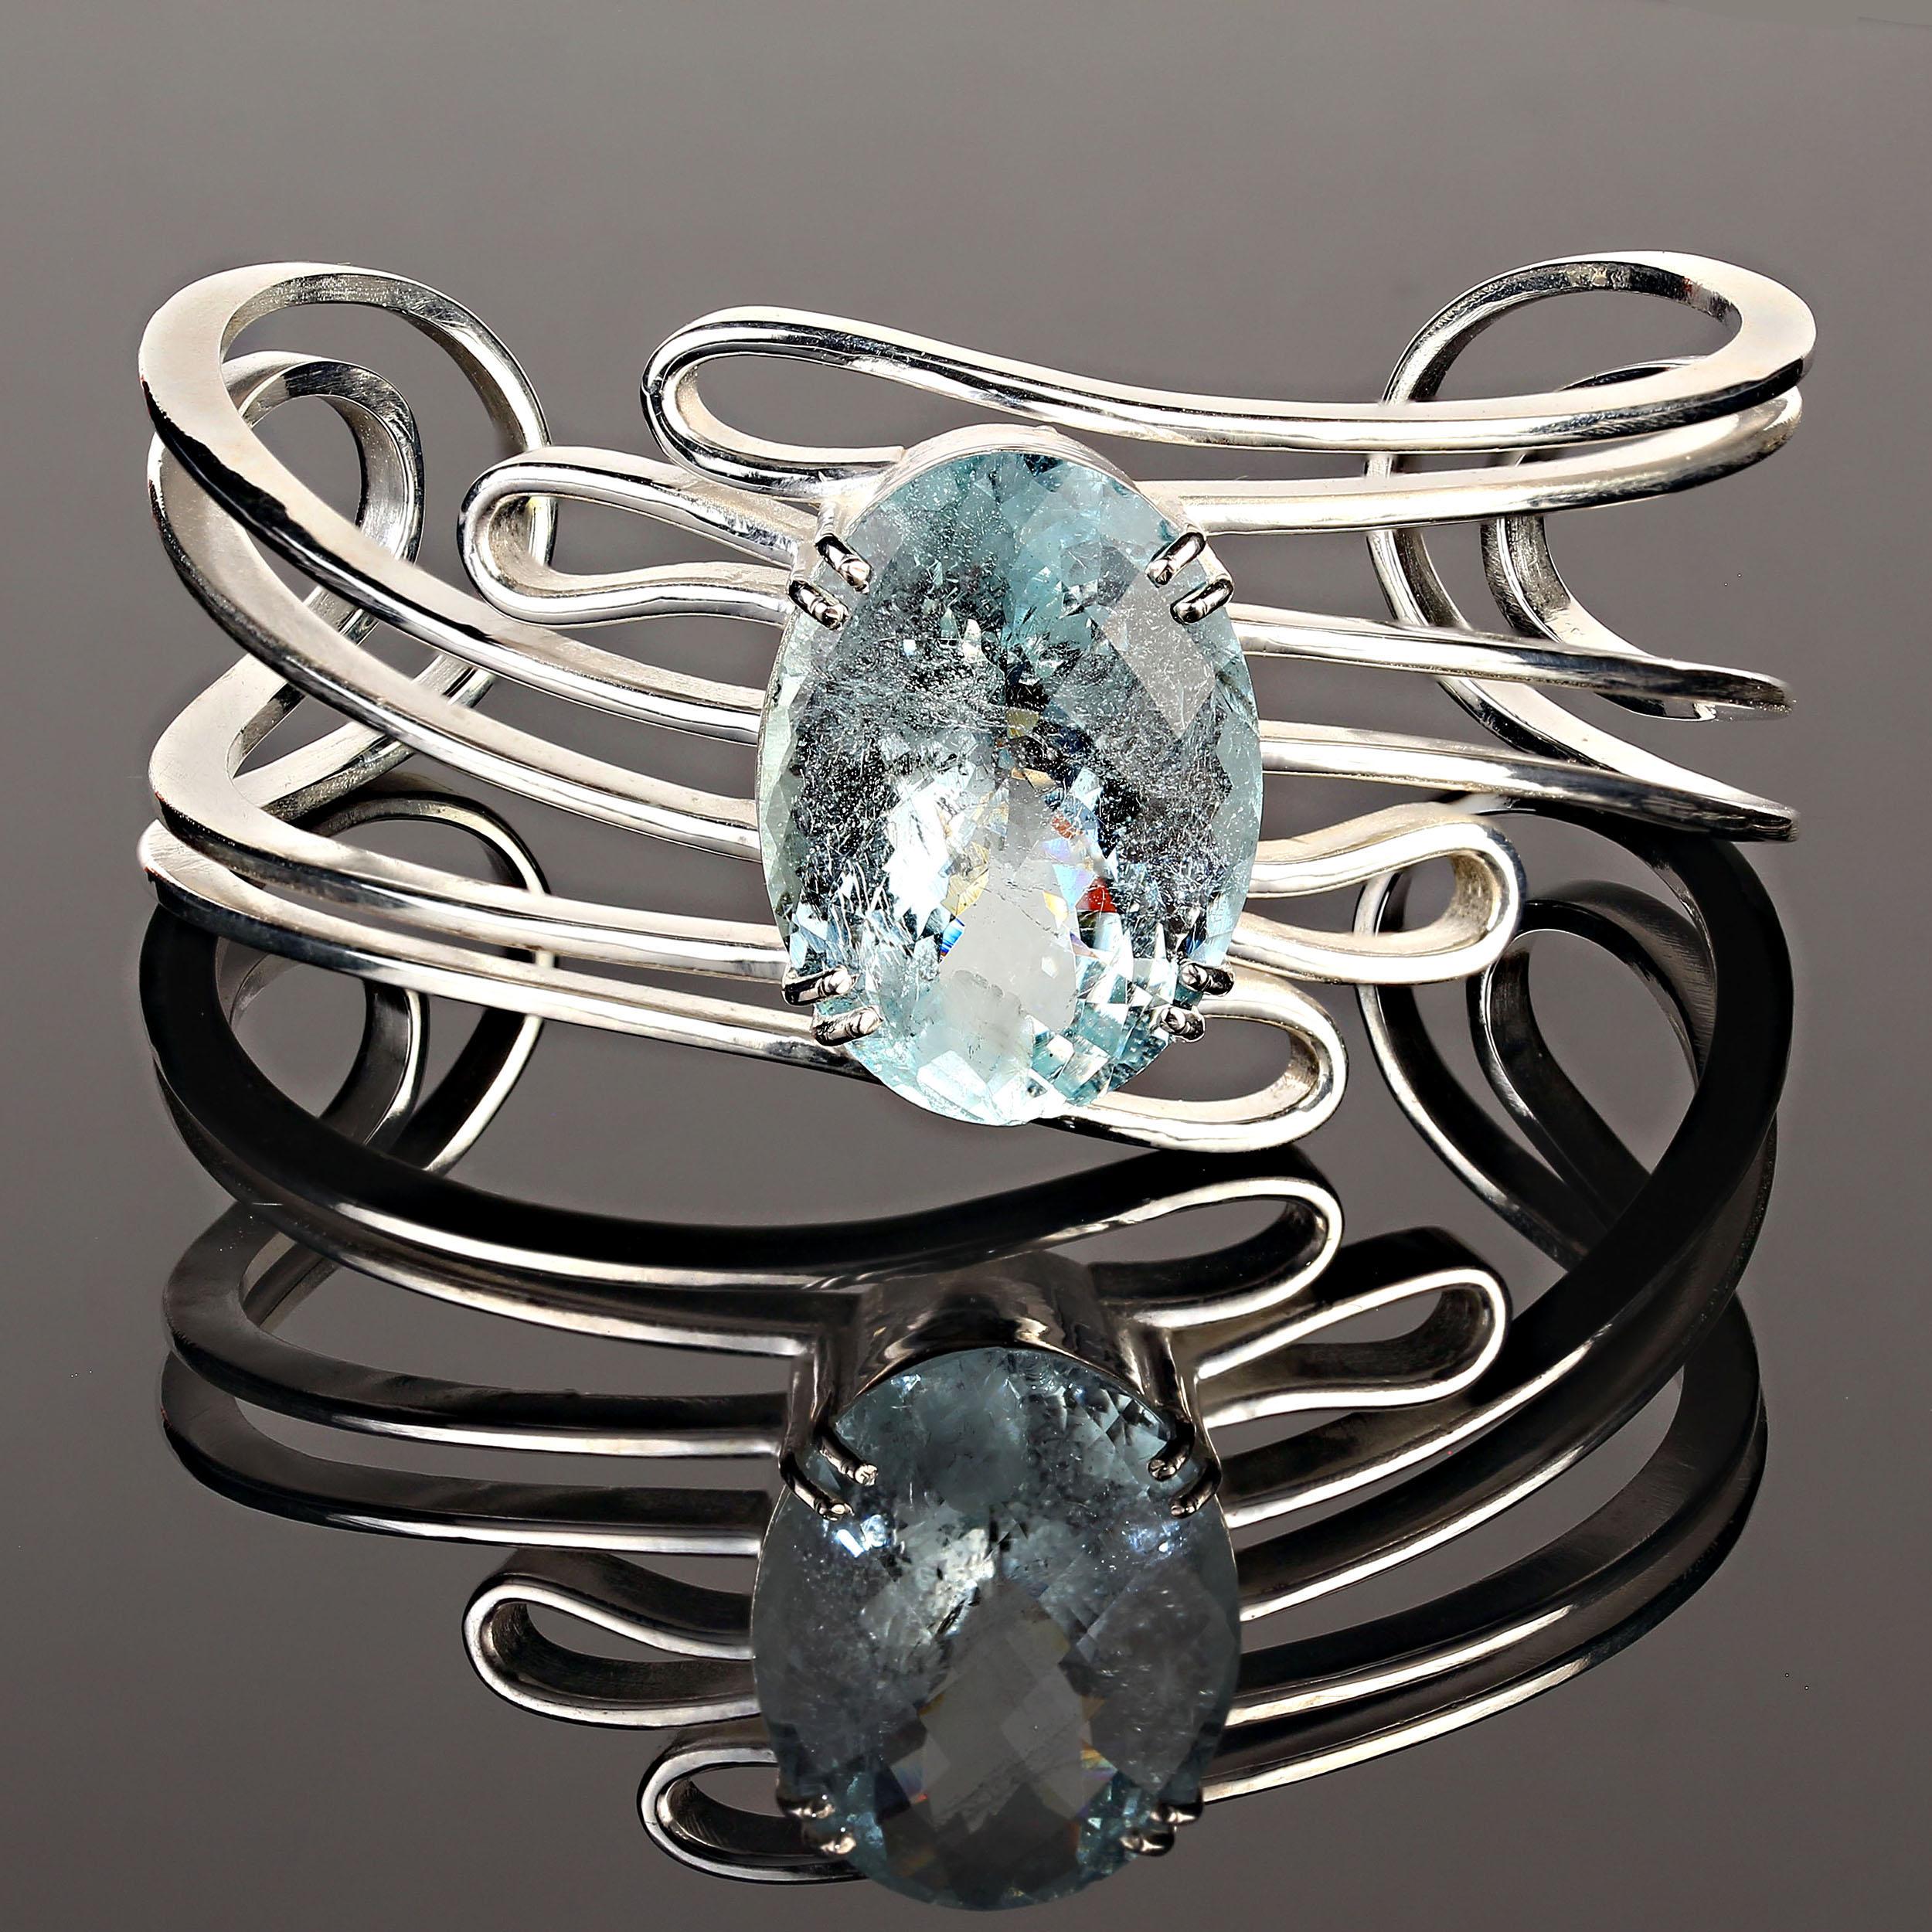 Oval Cut AJD Magnificent 25 Carat Oval Aquamarine in Sterling  Bracelet March Birthstone! For Sale